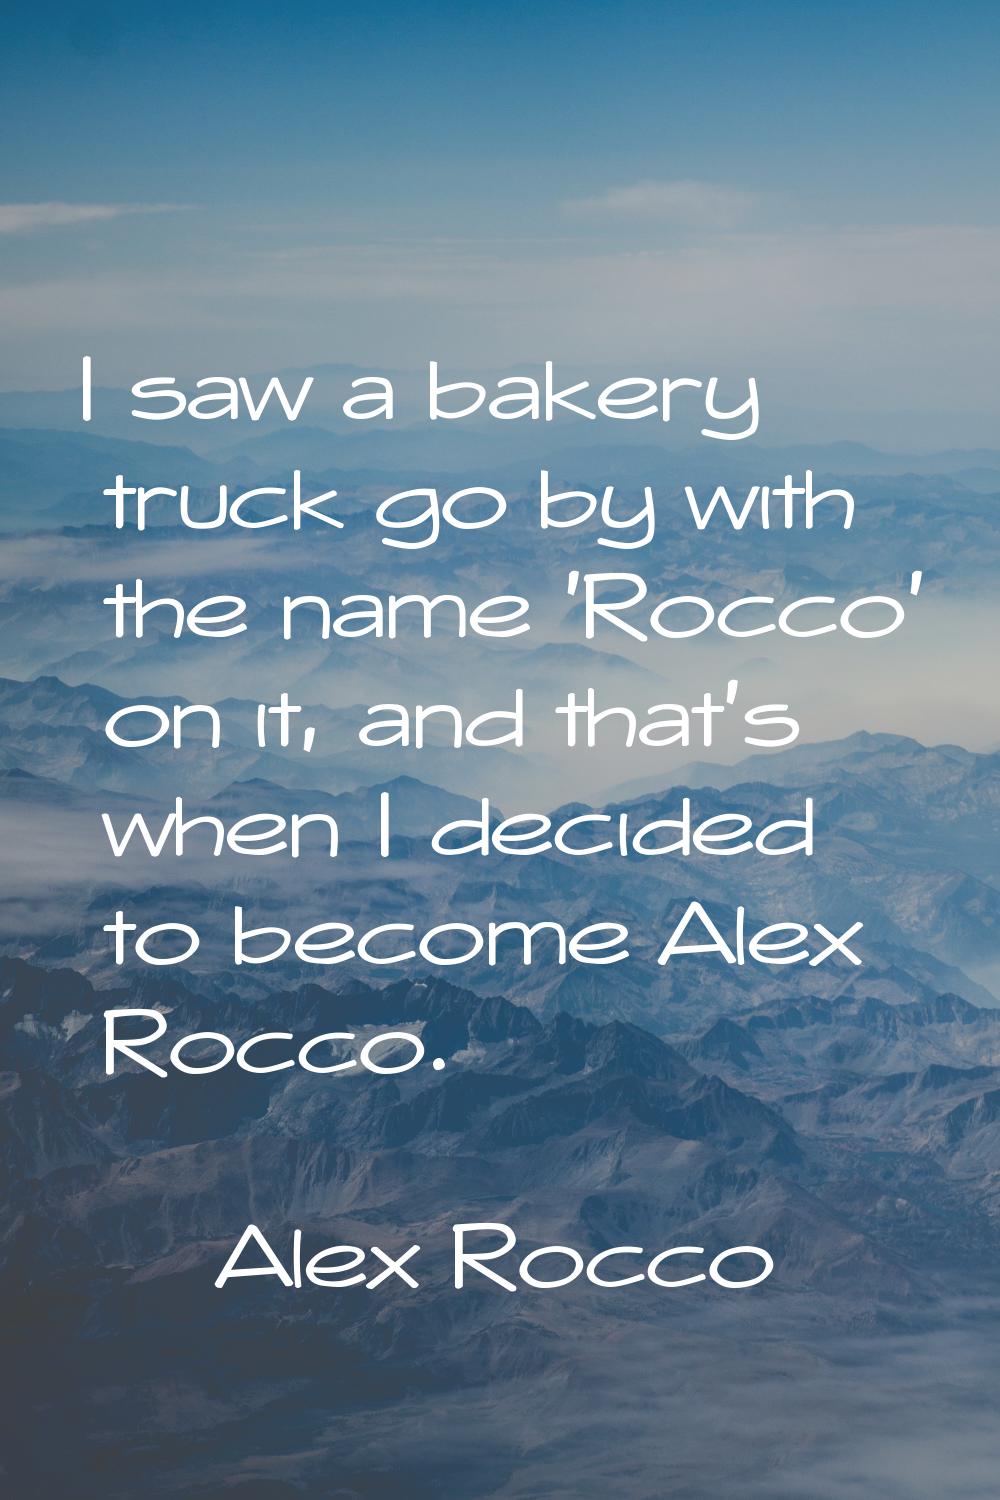 I saw a bakery truck go by with the name 'Rocco' on it, and that's when I decided to become Alex Ro